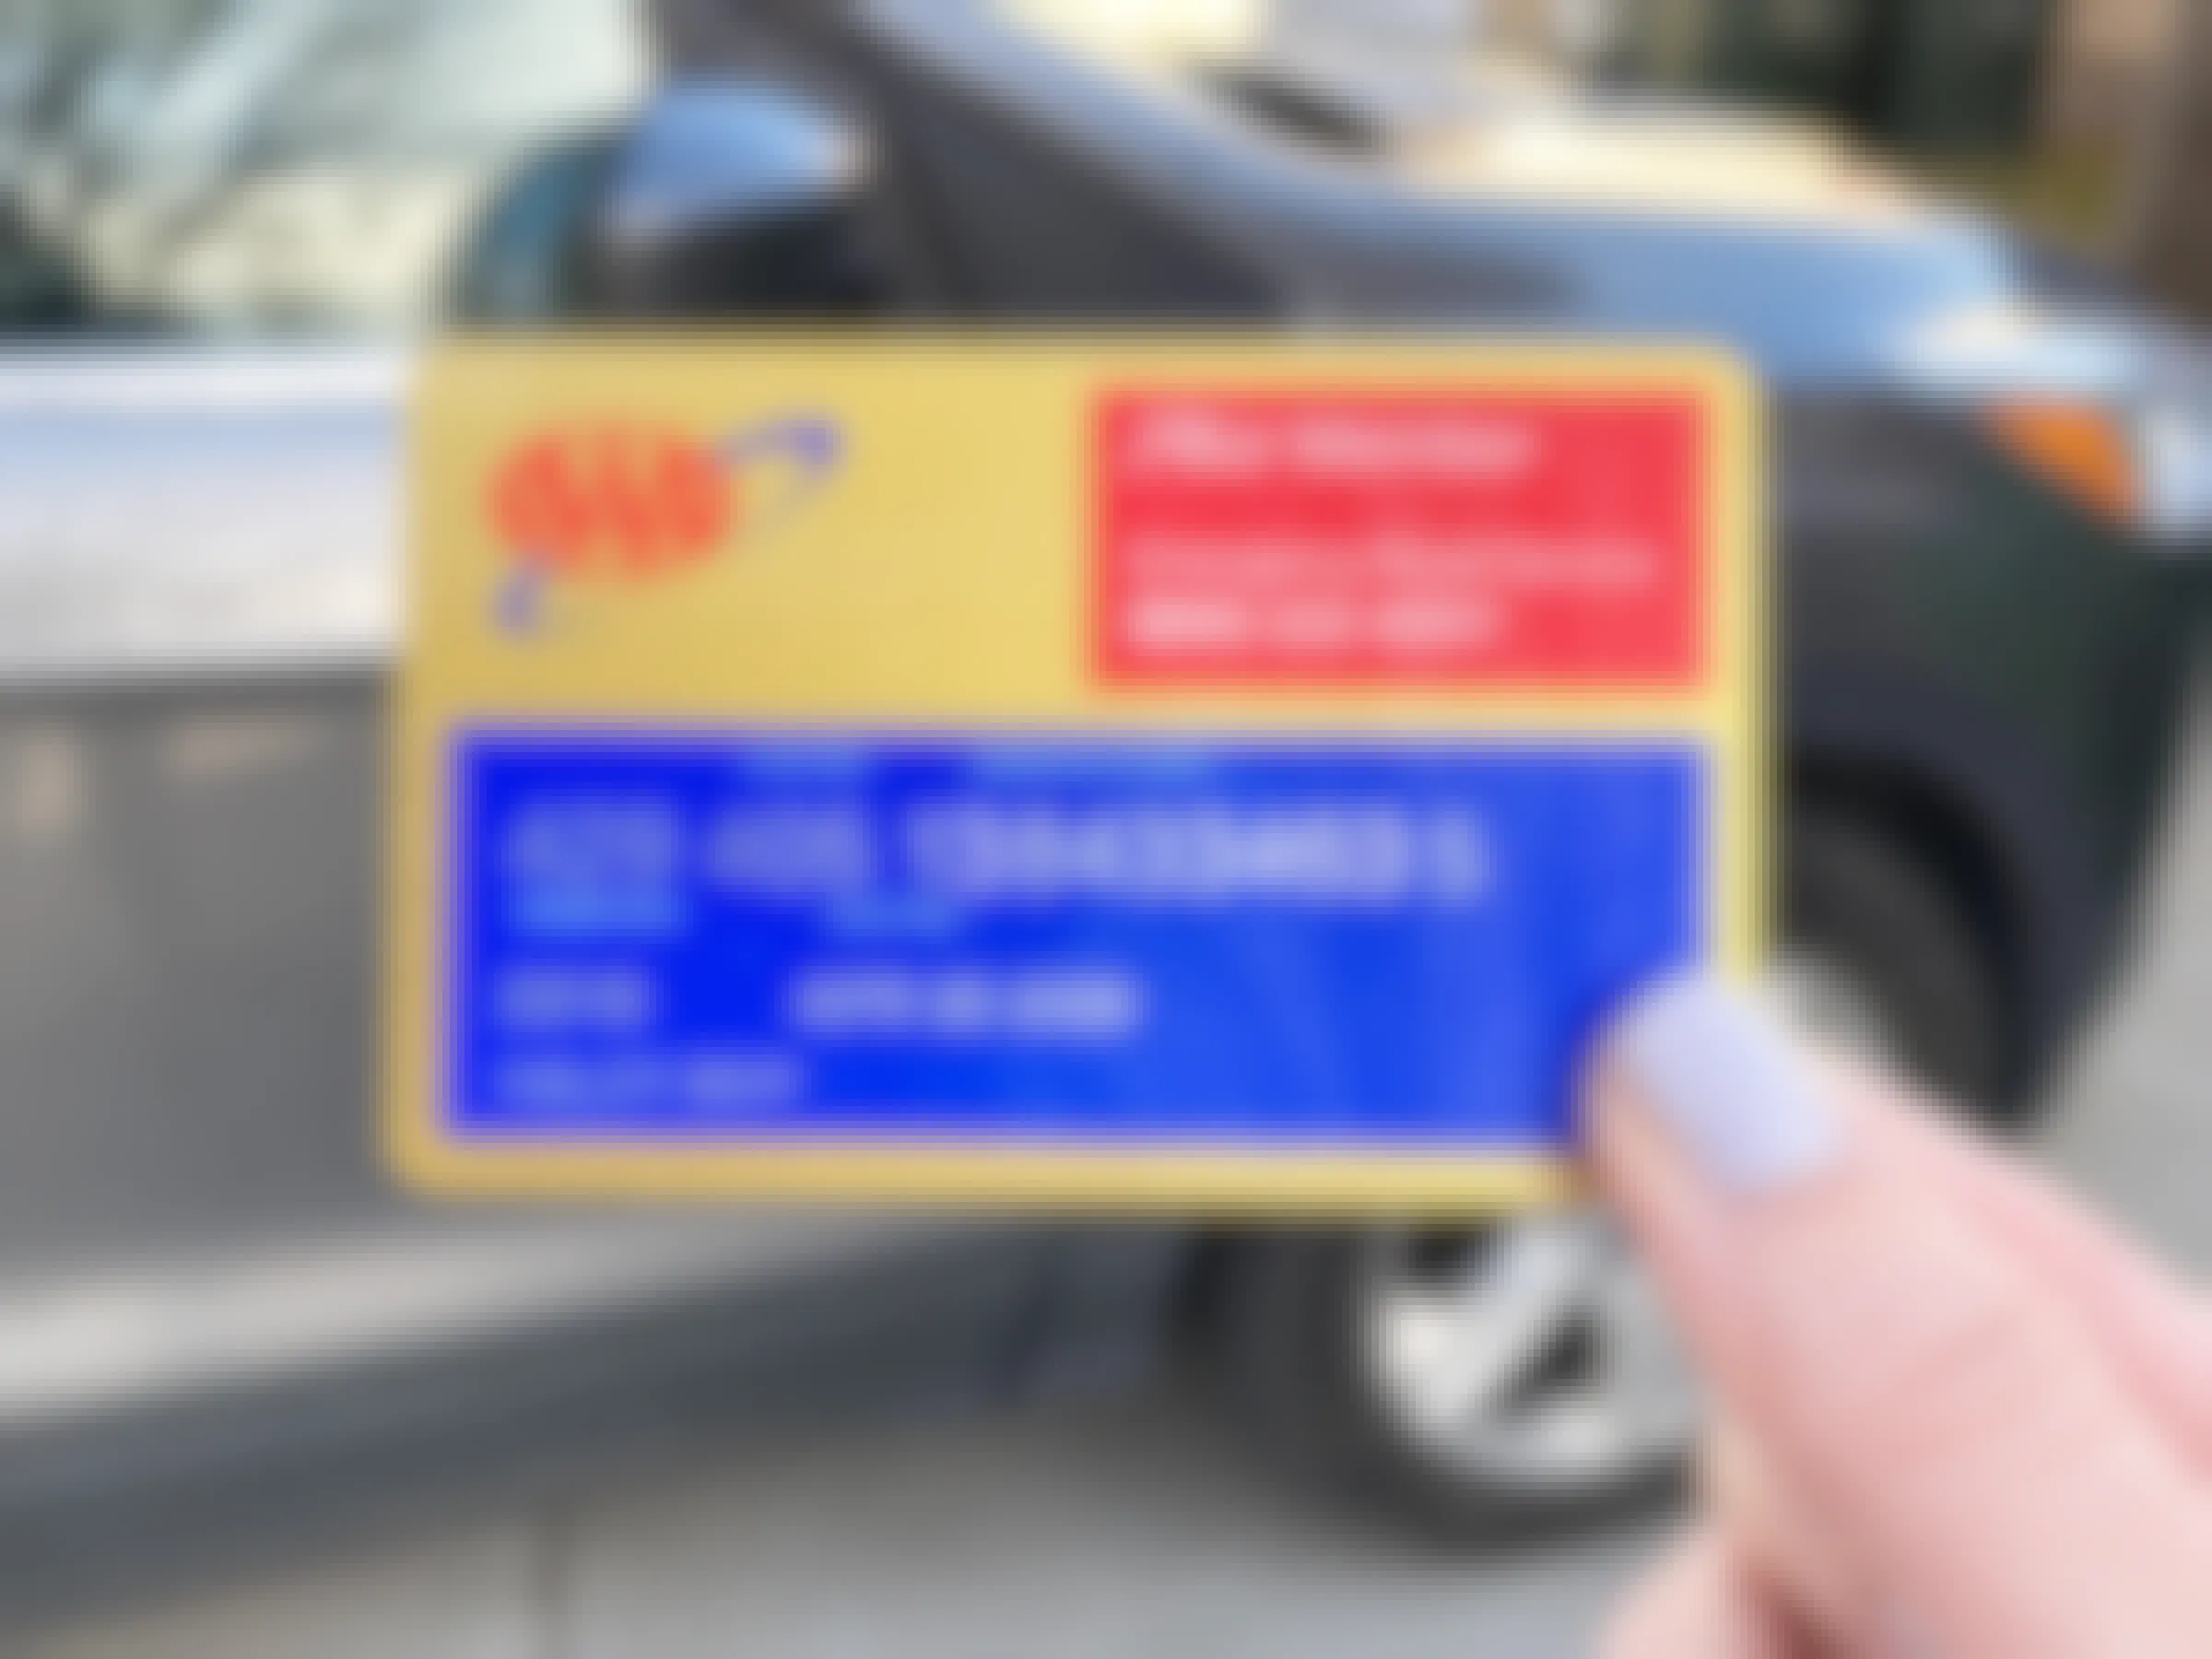 AAA card held in front of a car.